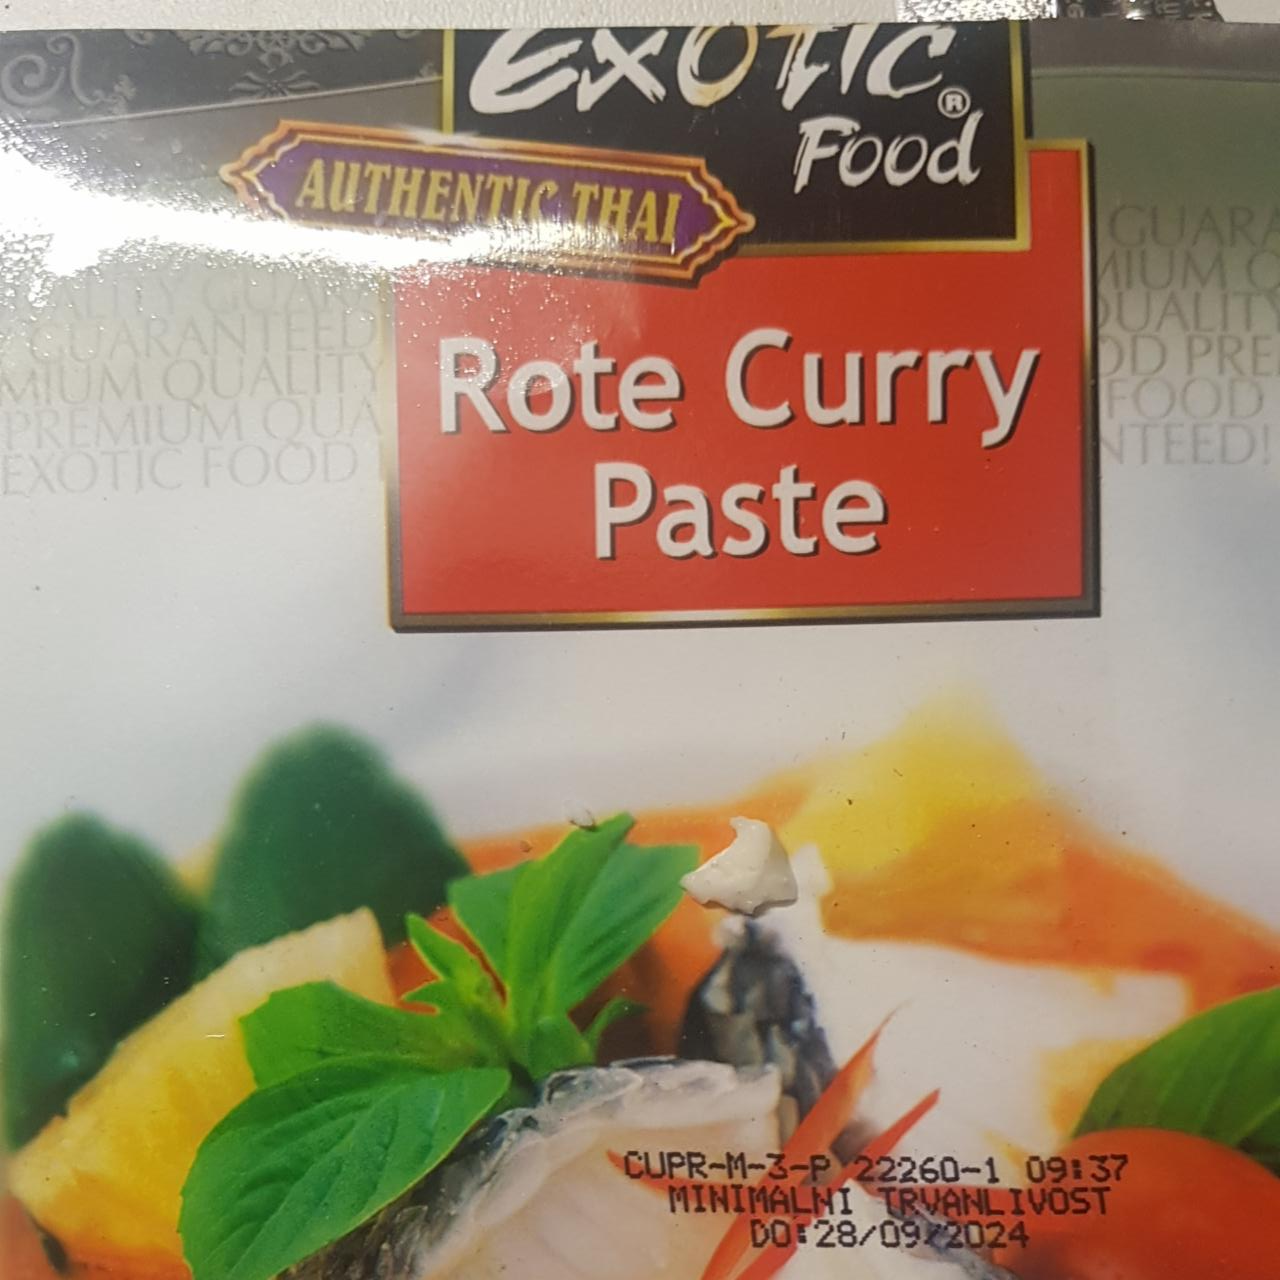 Fotografie - Rote curry paste Exotic Food